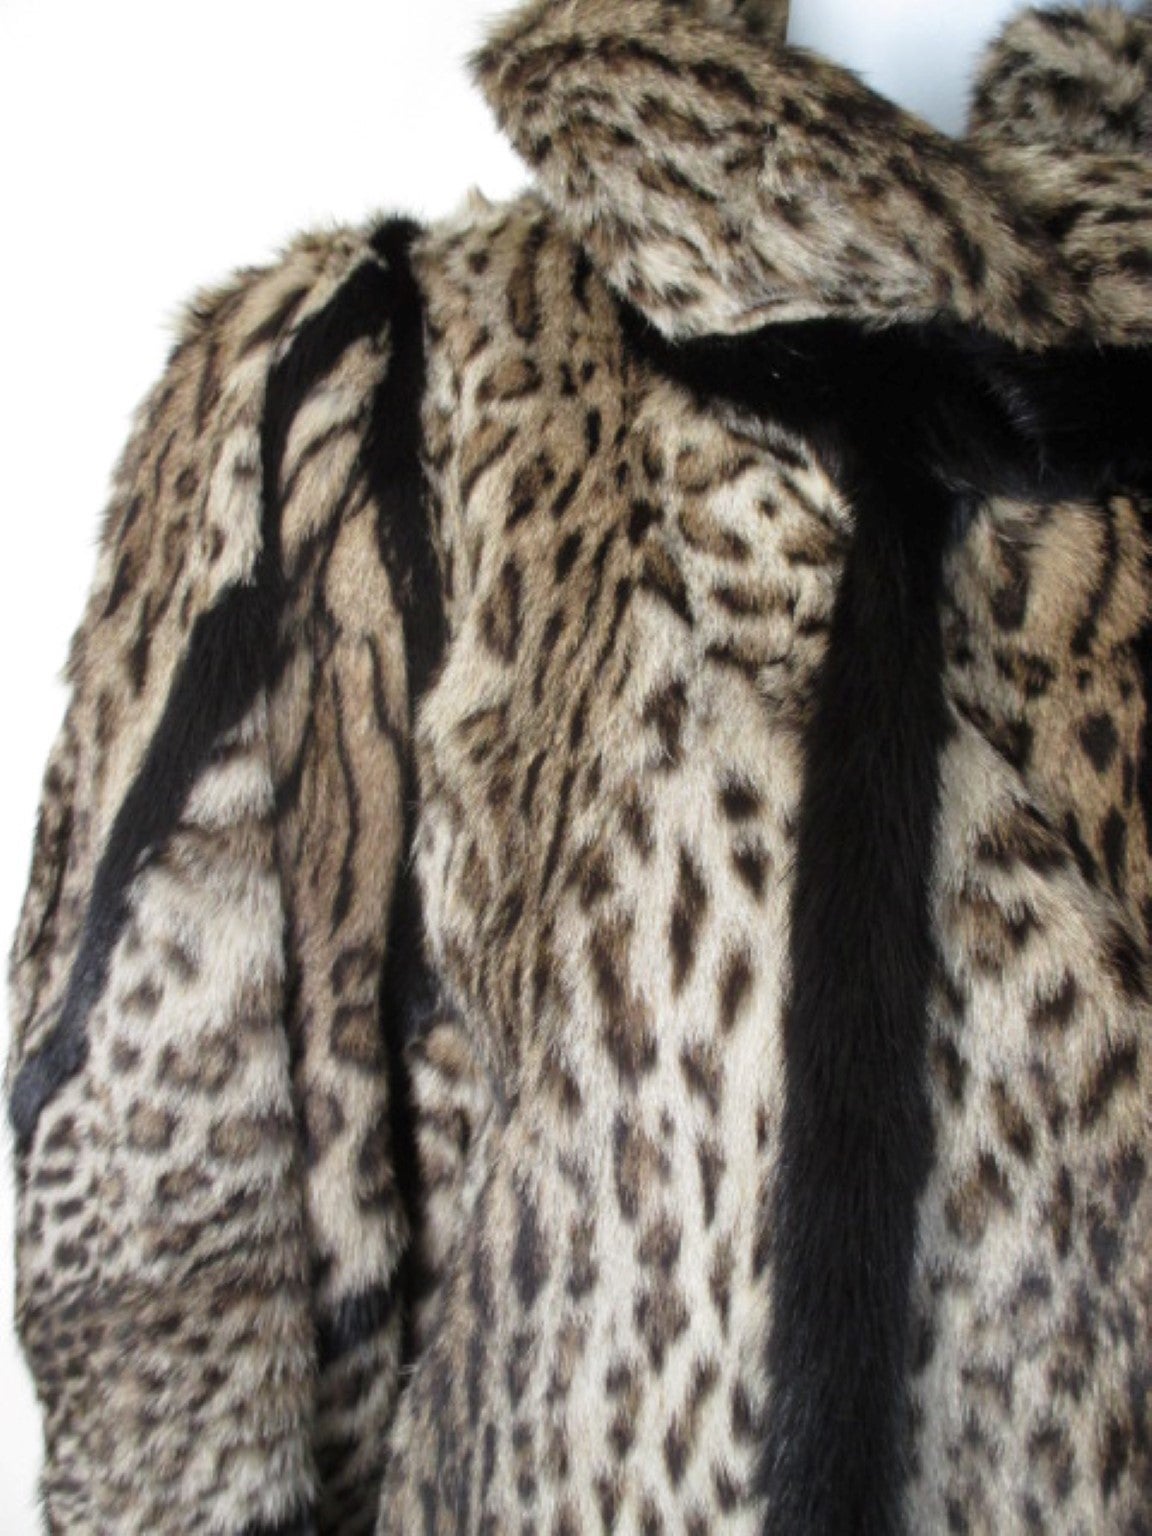 This exclusive design vintage fur coat is full length has 5 hooks and 2 black leather line pockets.
Trimmed with black mink fur and has wide sleeves.
This item is a collectors piece from around 1940's
Appears to be EU 38-40/US 8-10 medium,please